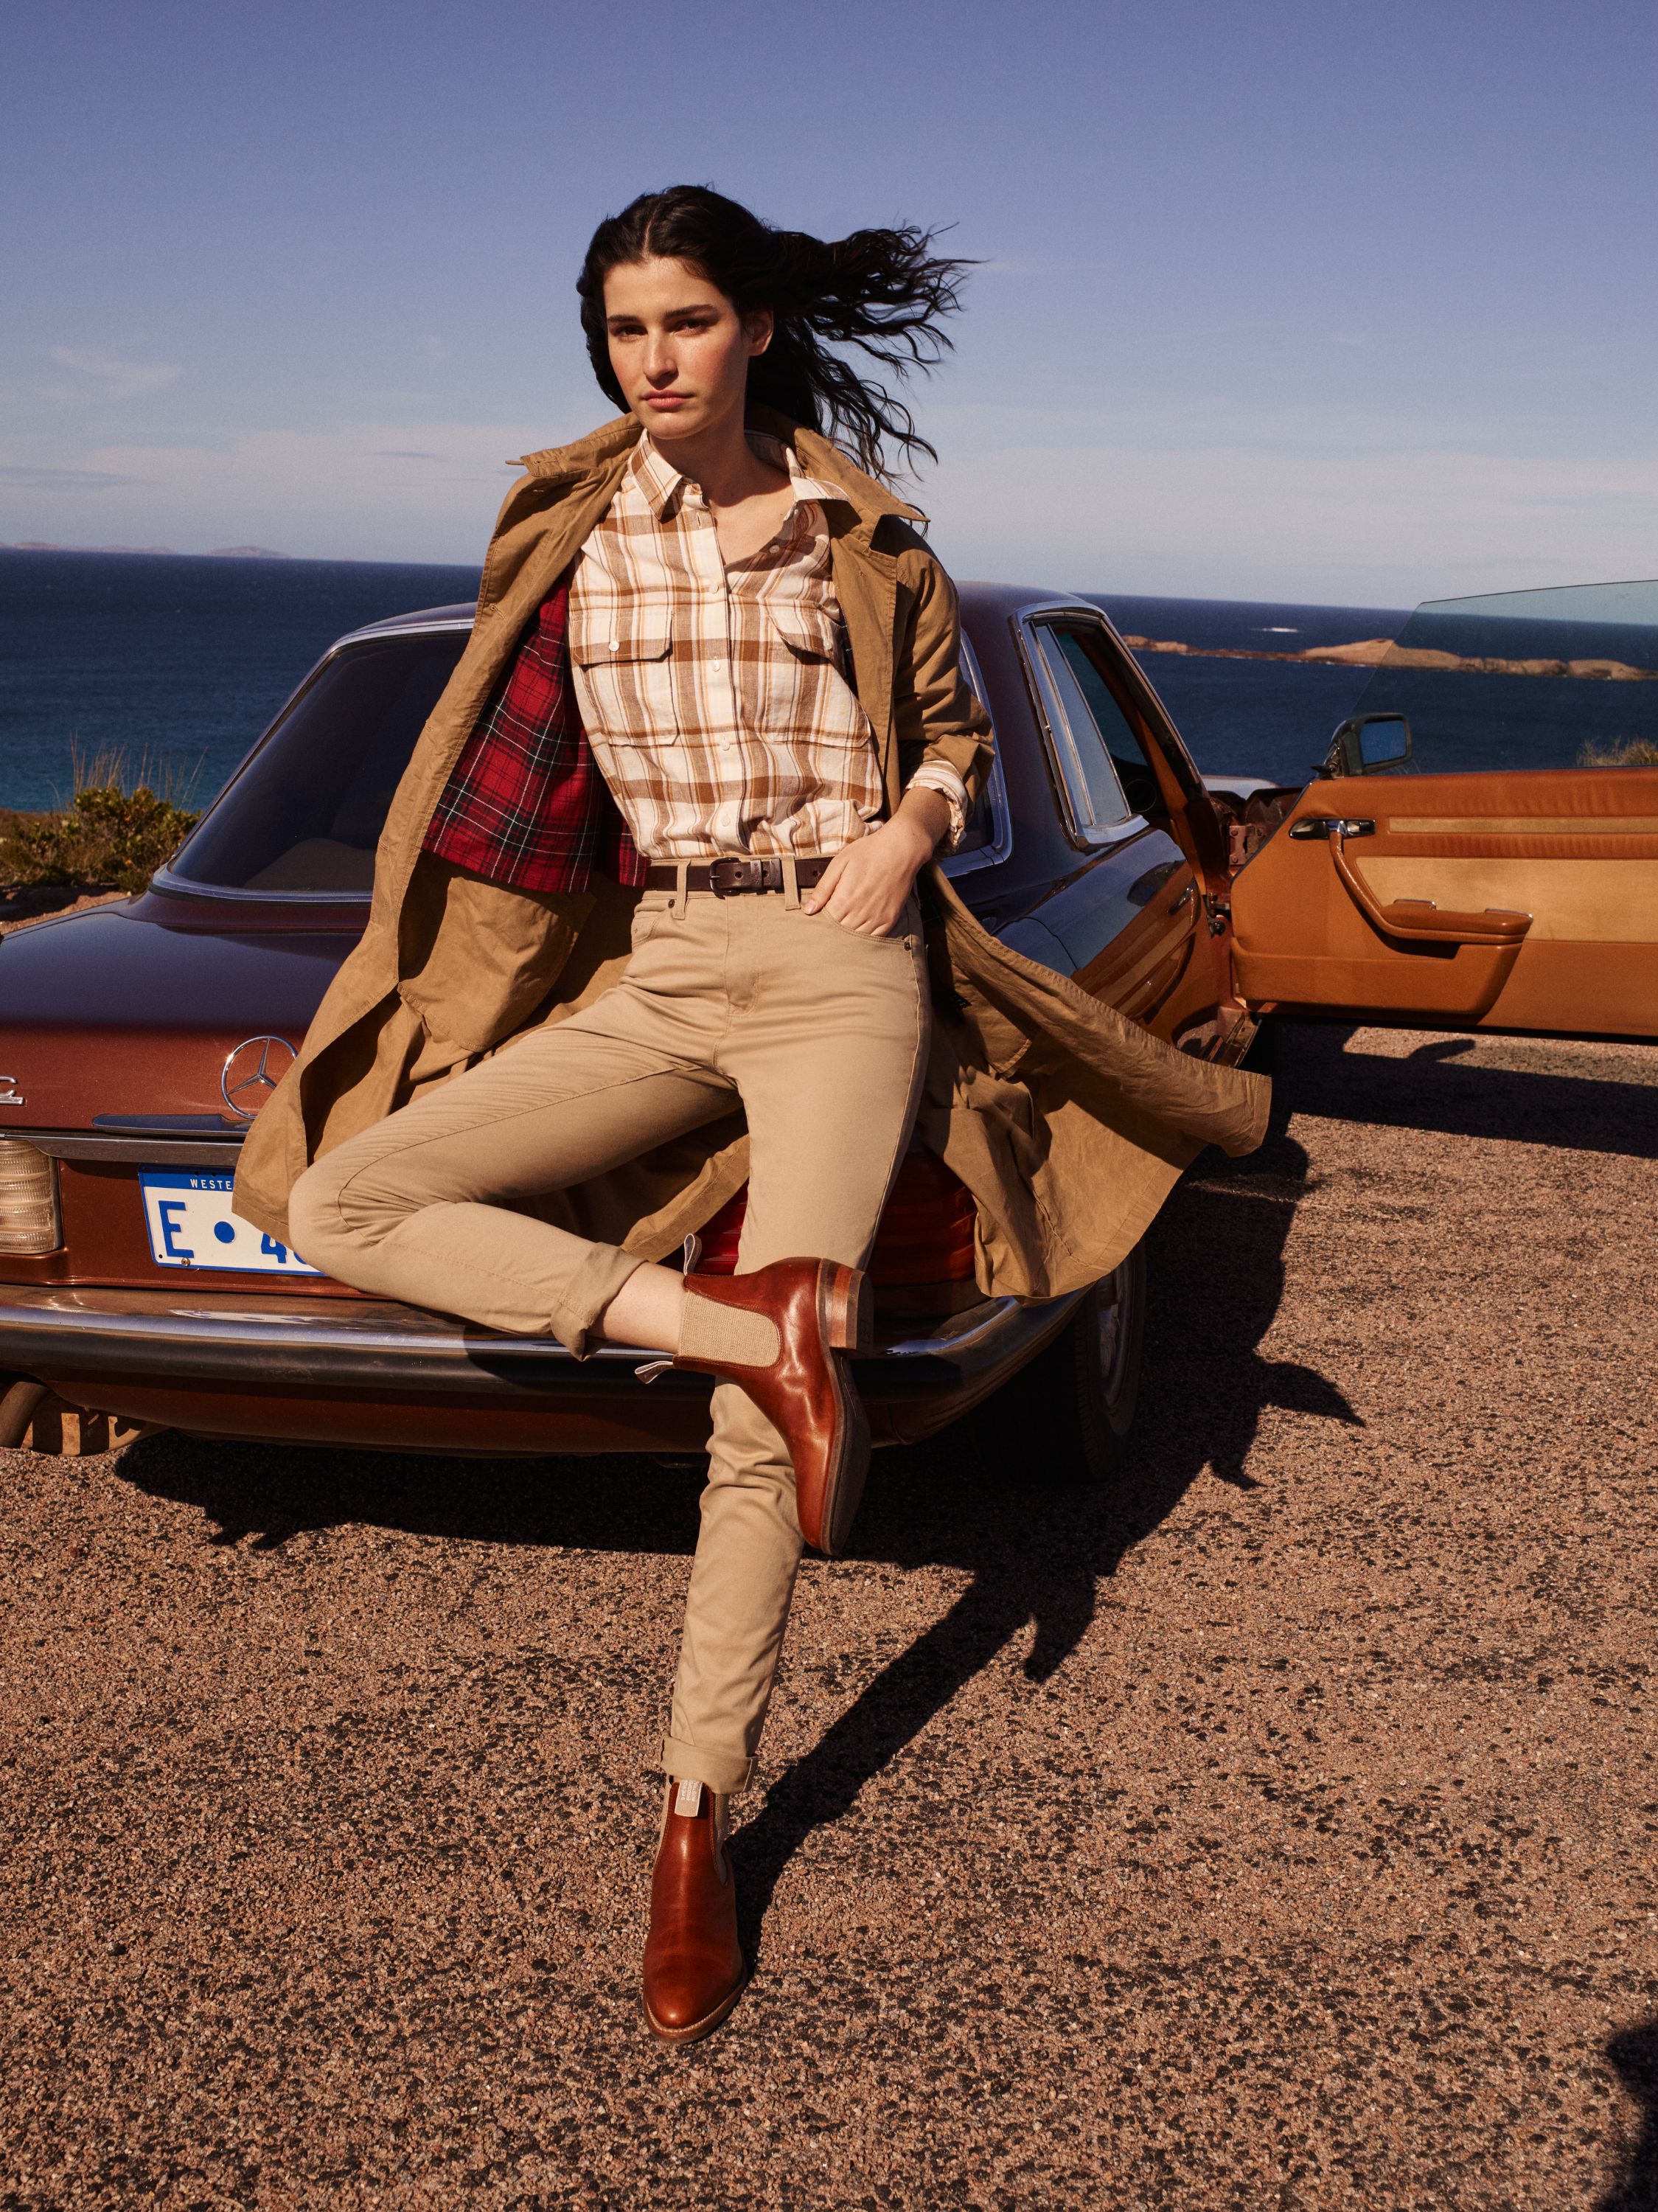 R.M.Williams celebrates the beauty of the Australian outback